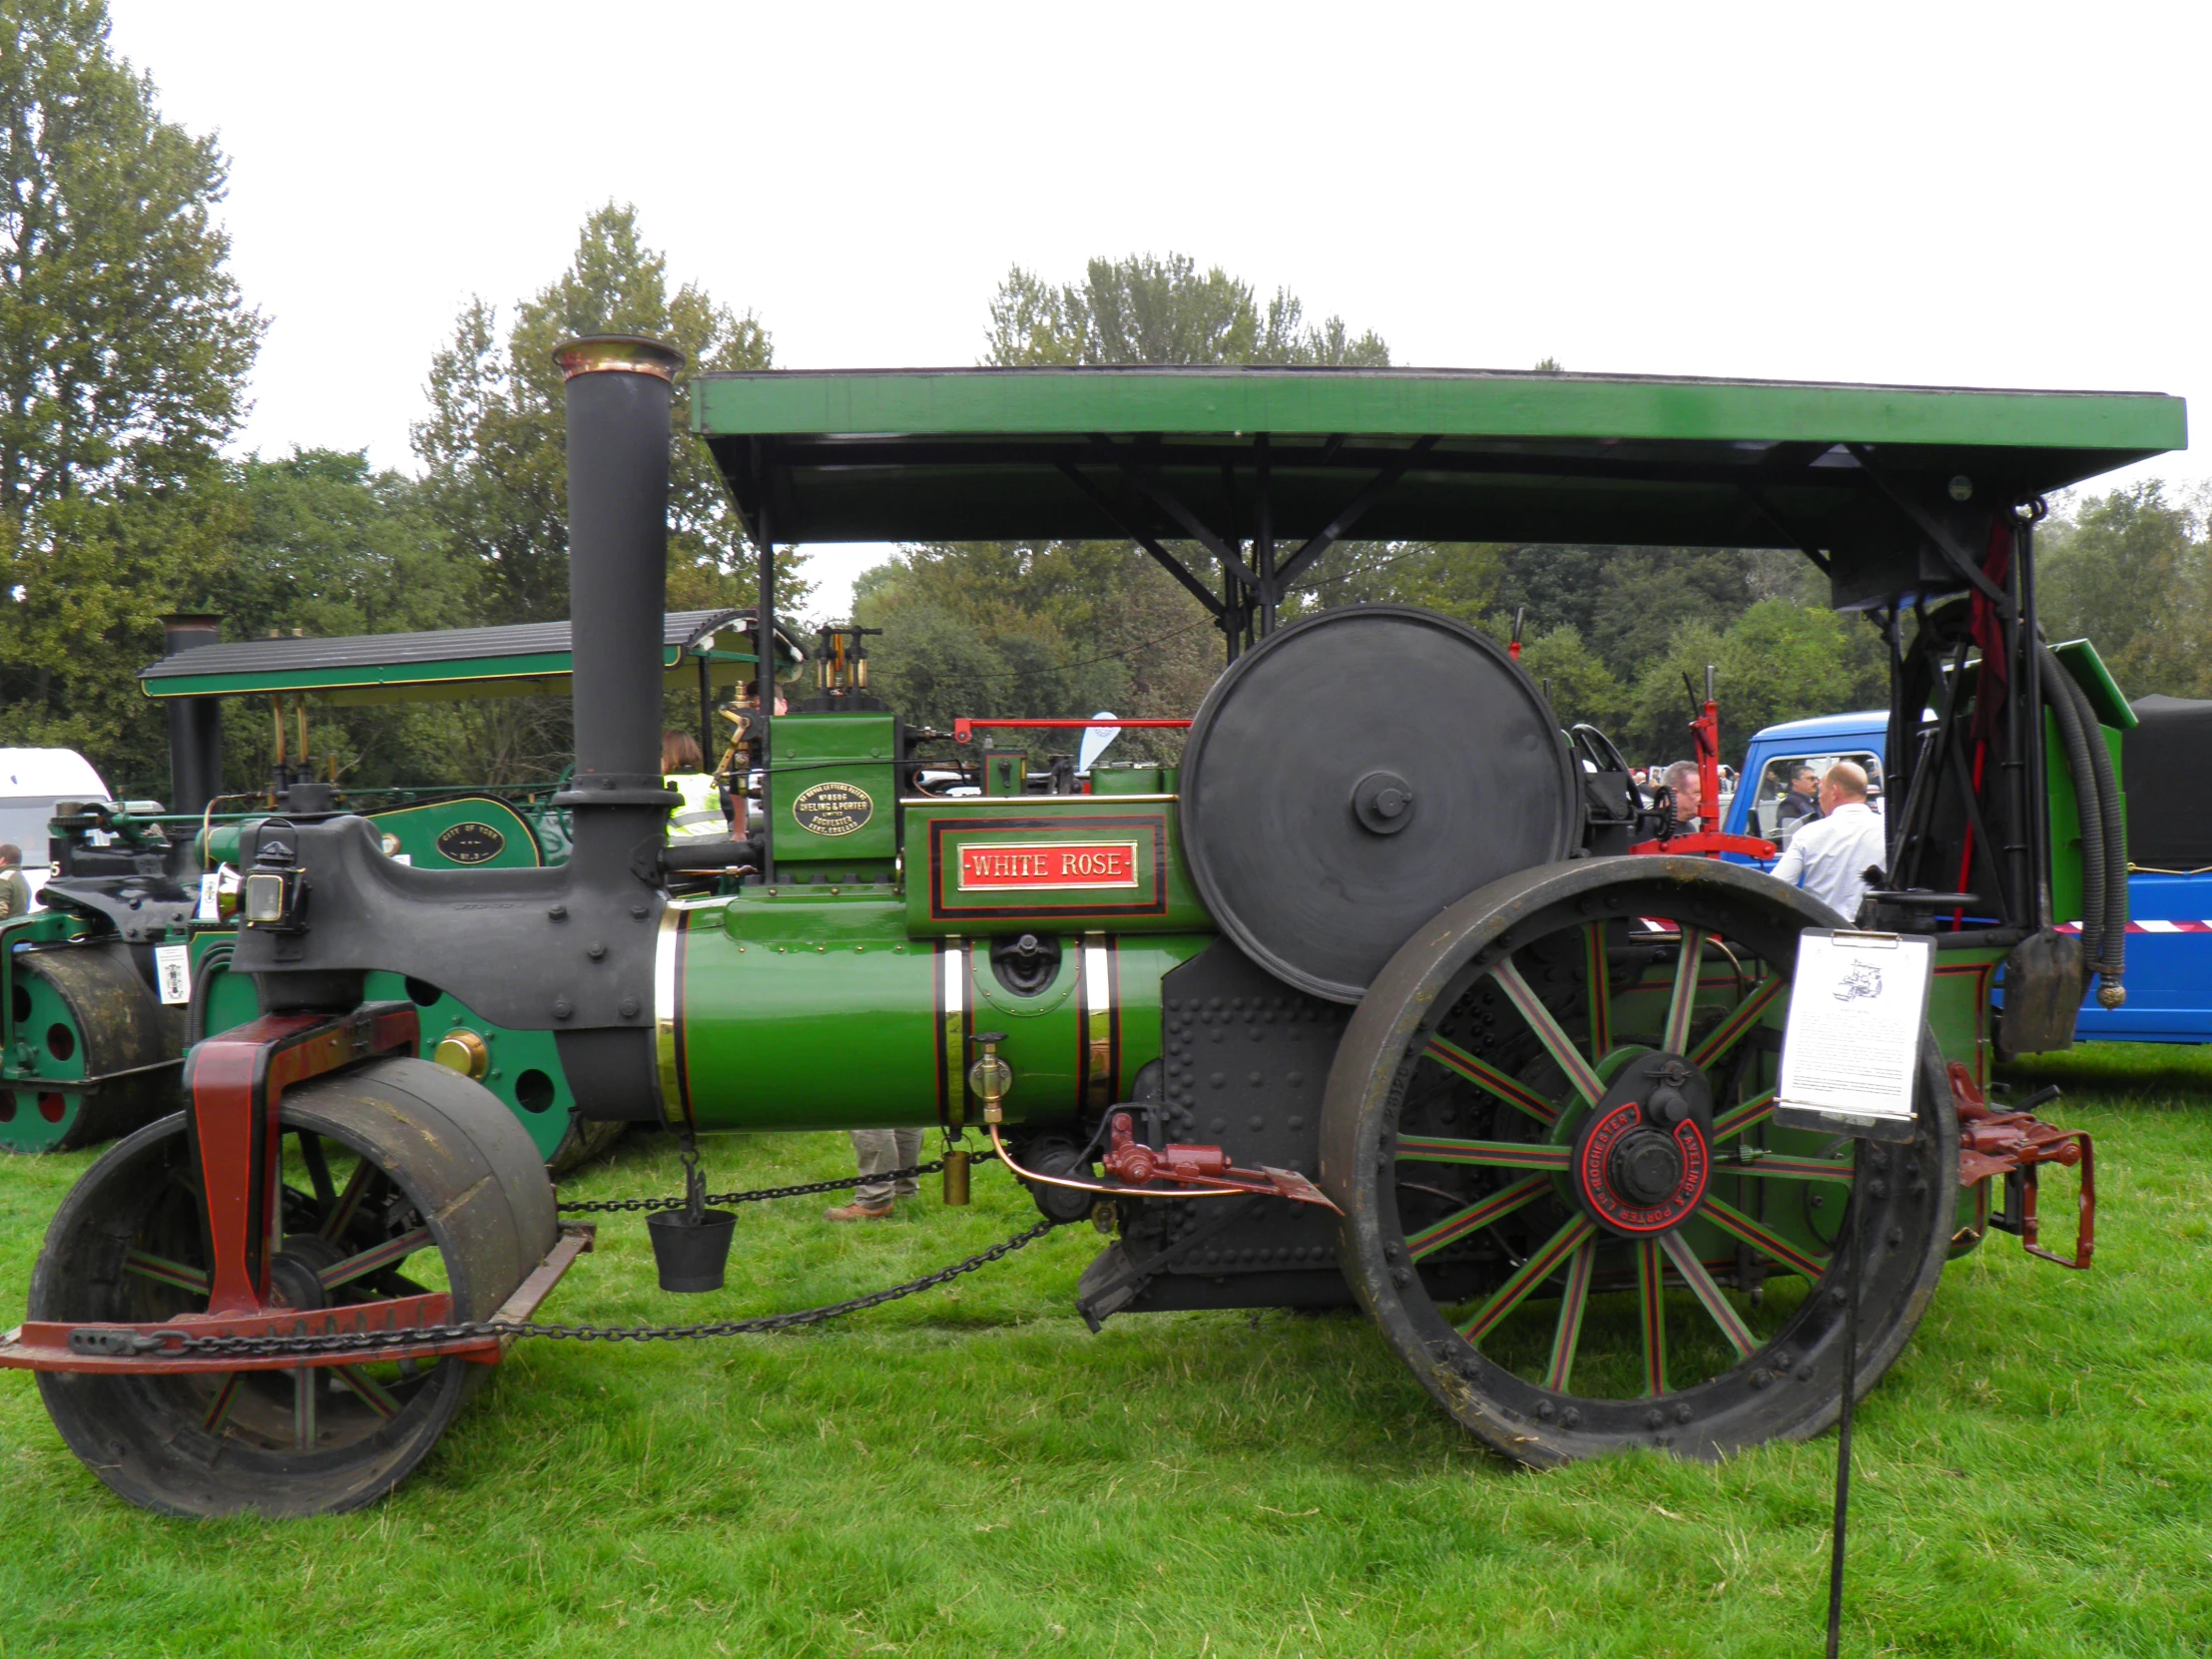 the old, green and black tractor sits on the grass